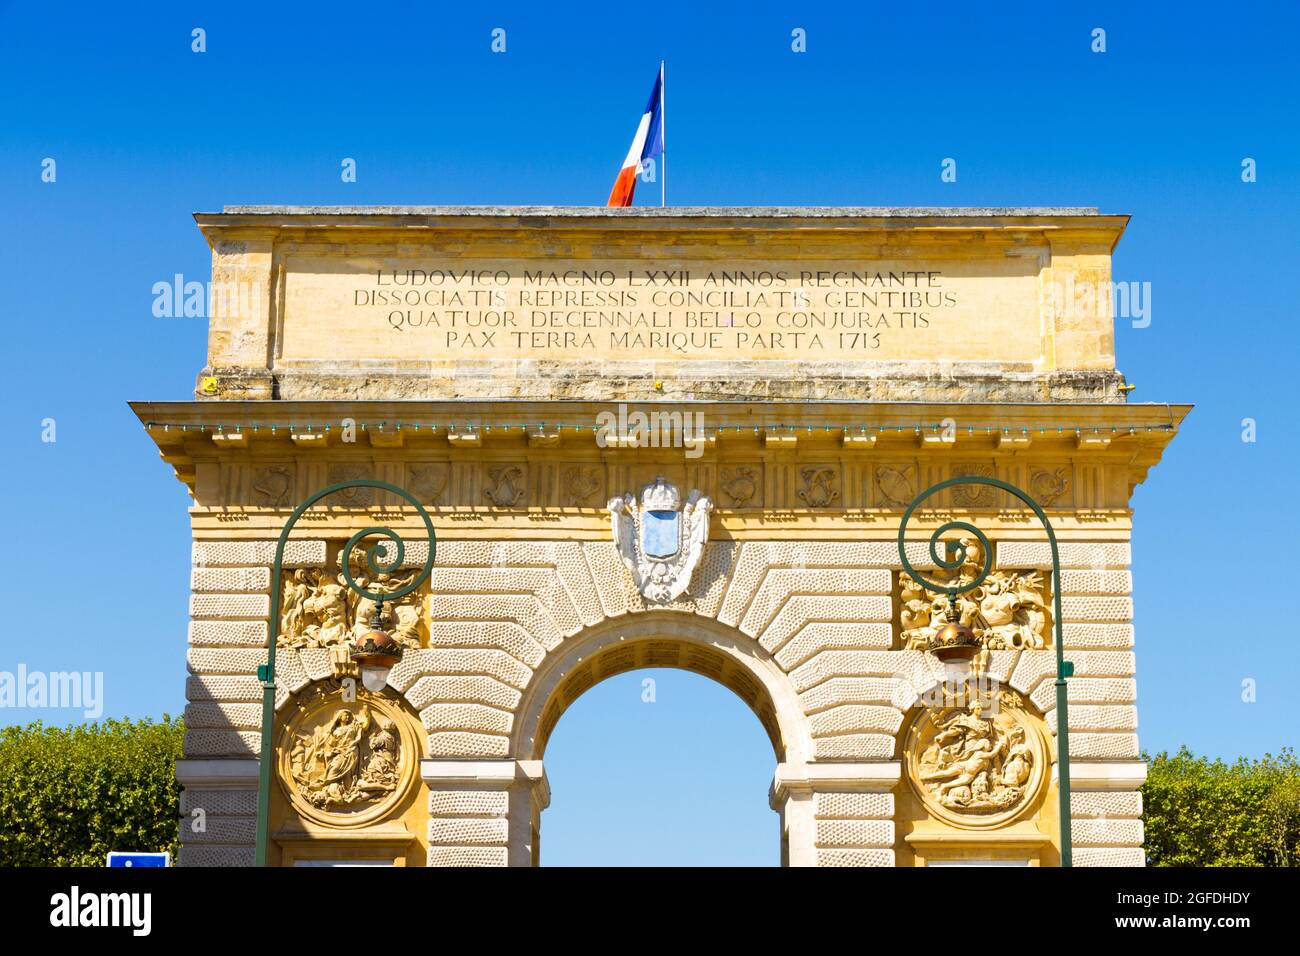 Porte du Peyrou, Montpellier, France. Inscr: Louis the Great reigned 72 yr., conspirator nations were repressed and reconciled to the loyal ones durin Stock Photo